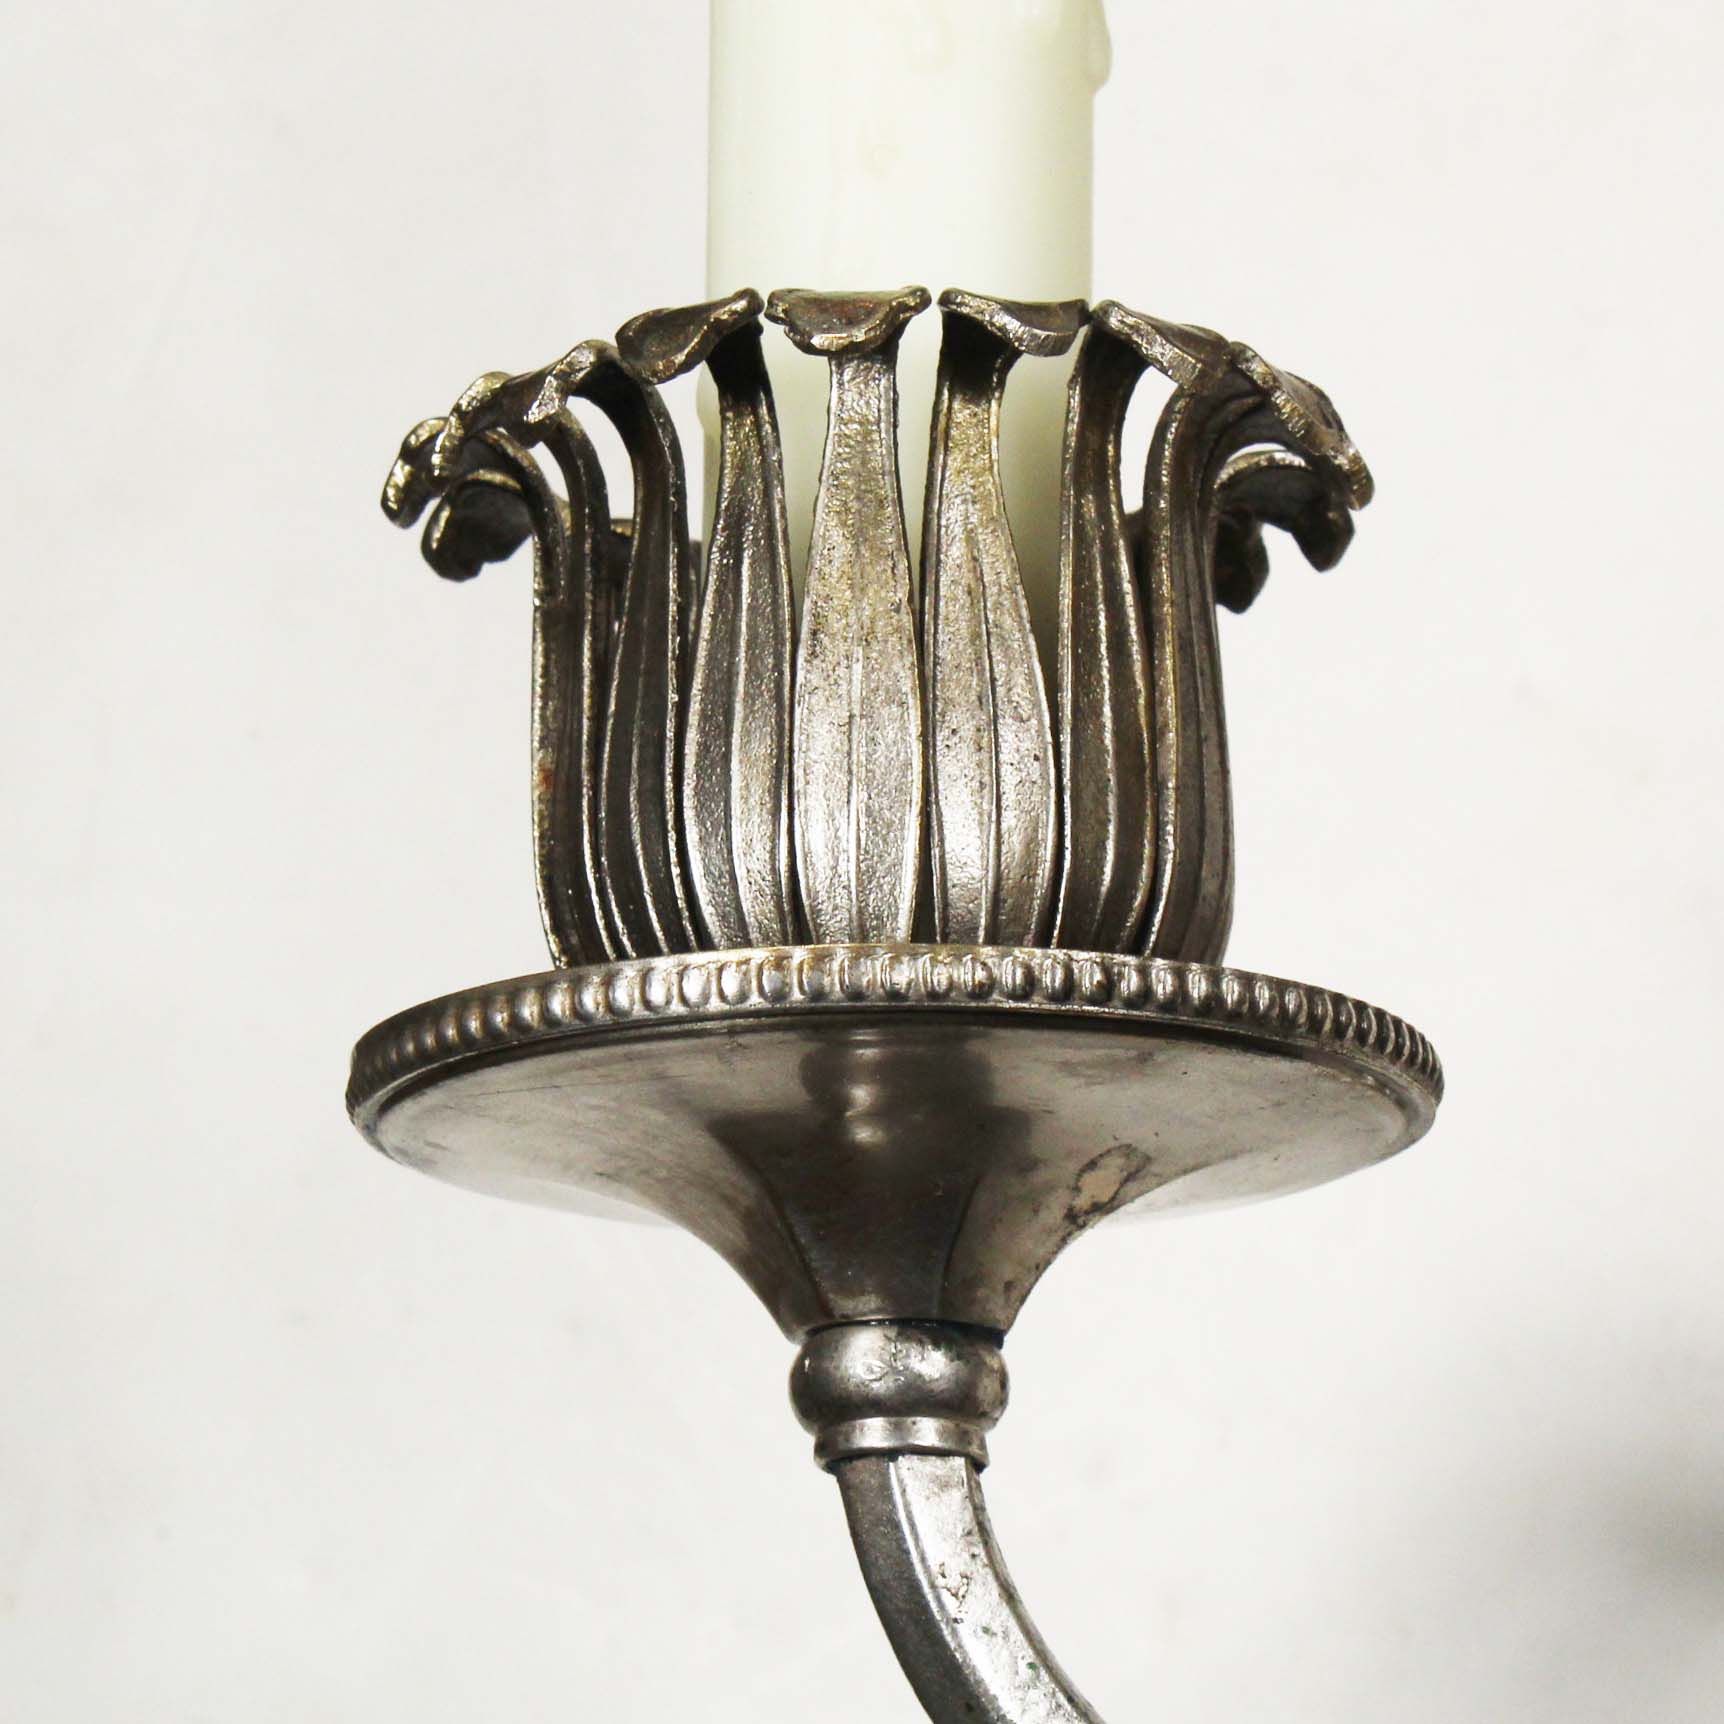 Matching Pairs of Antique Silver-Plated Three-Arm Sconces, c. 1905-69182